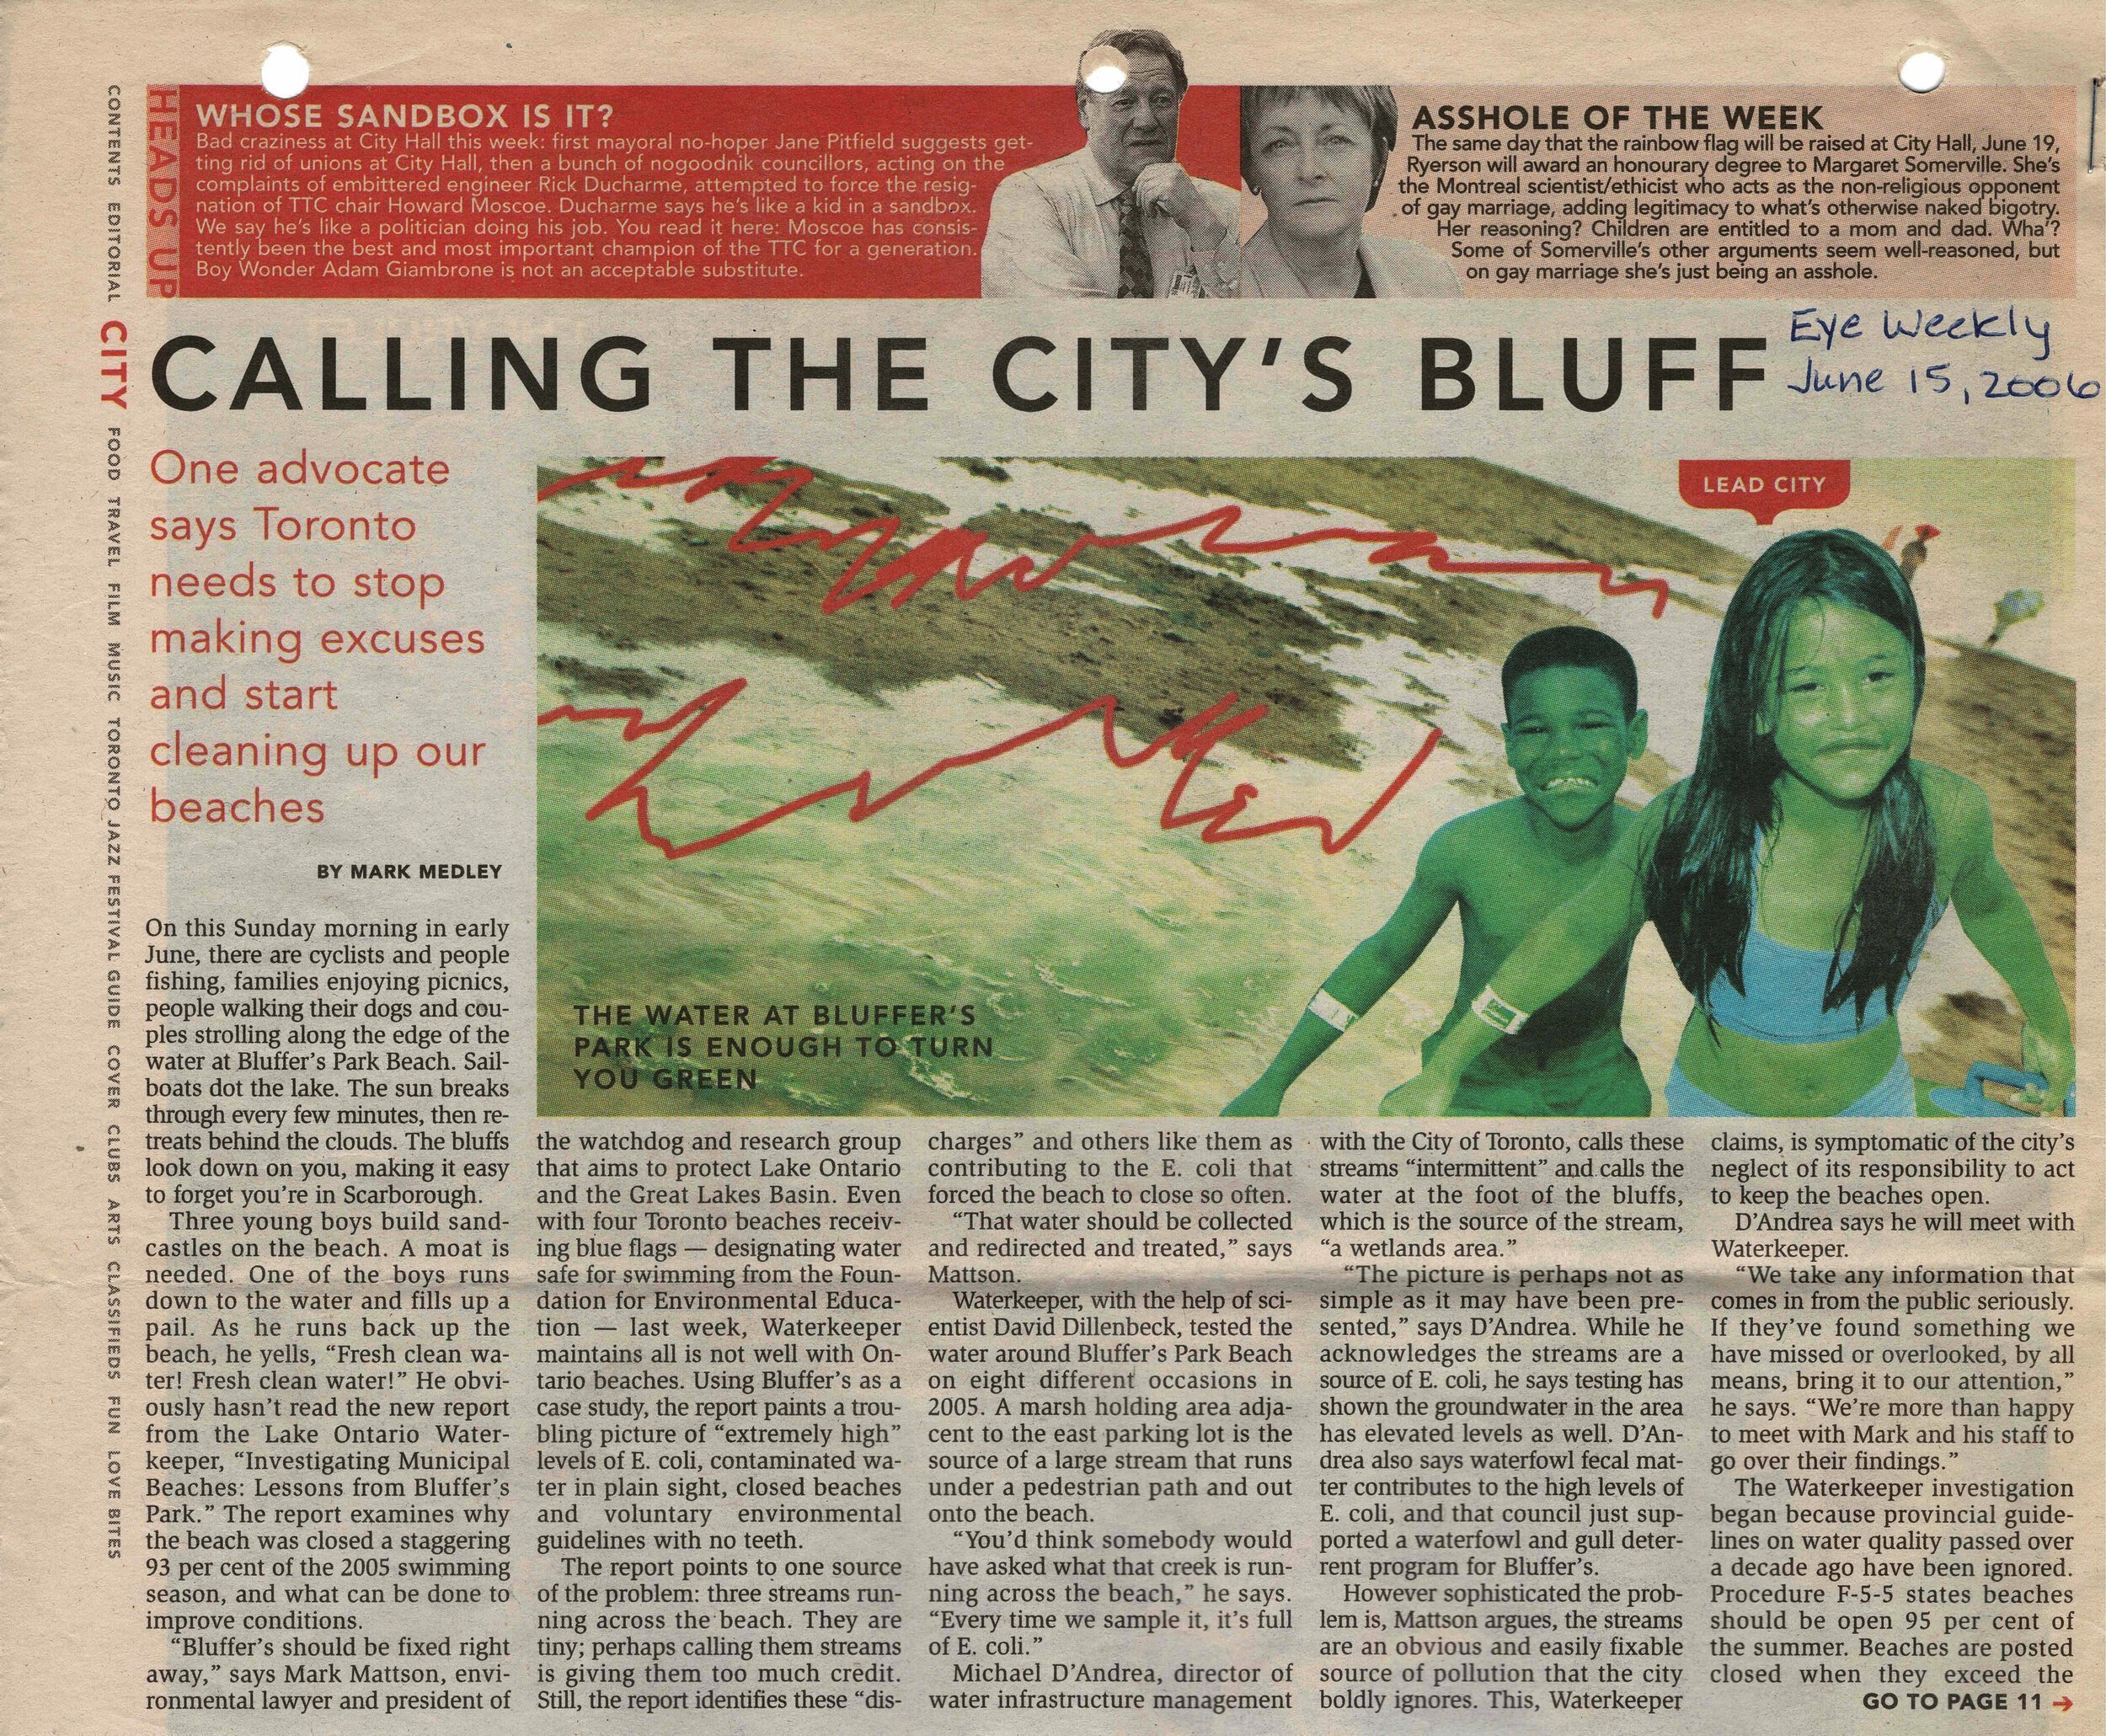 News article: Calling the City's Bluff, Eye Weekly, June 15, 2006